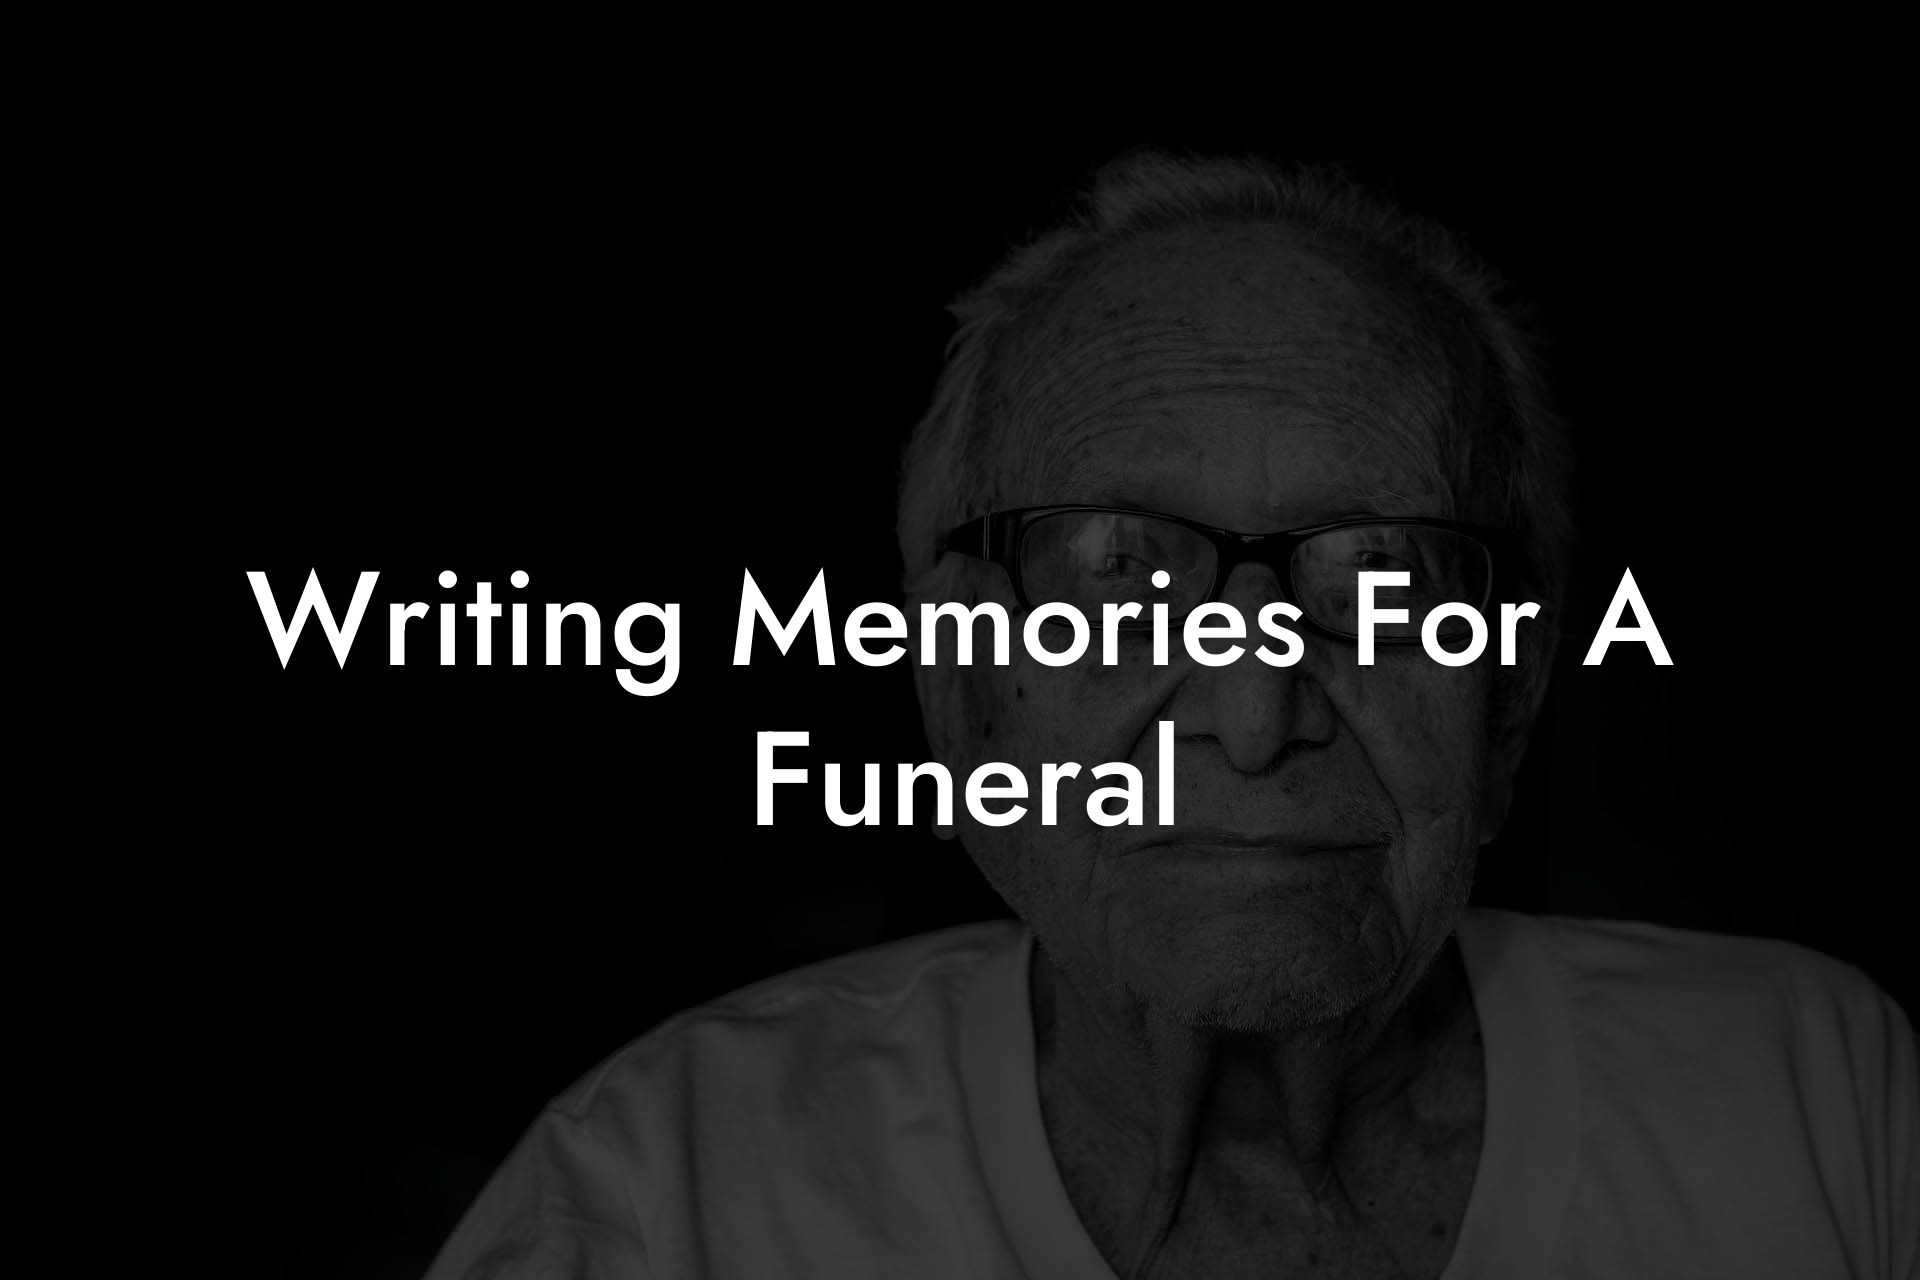 Writing Memories For A Funeral